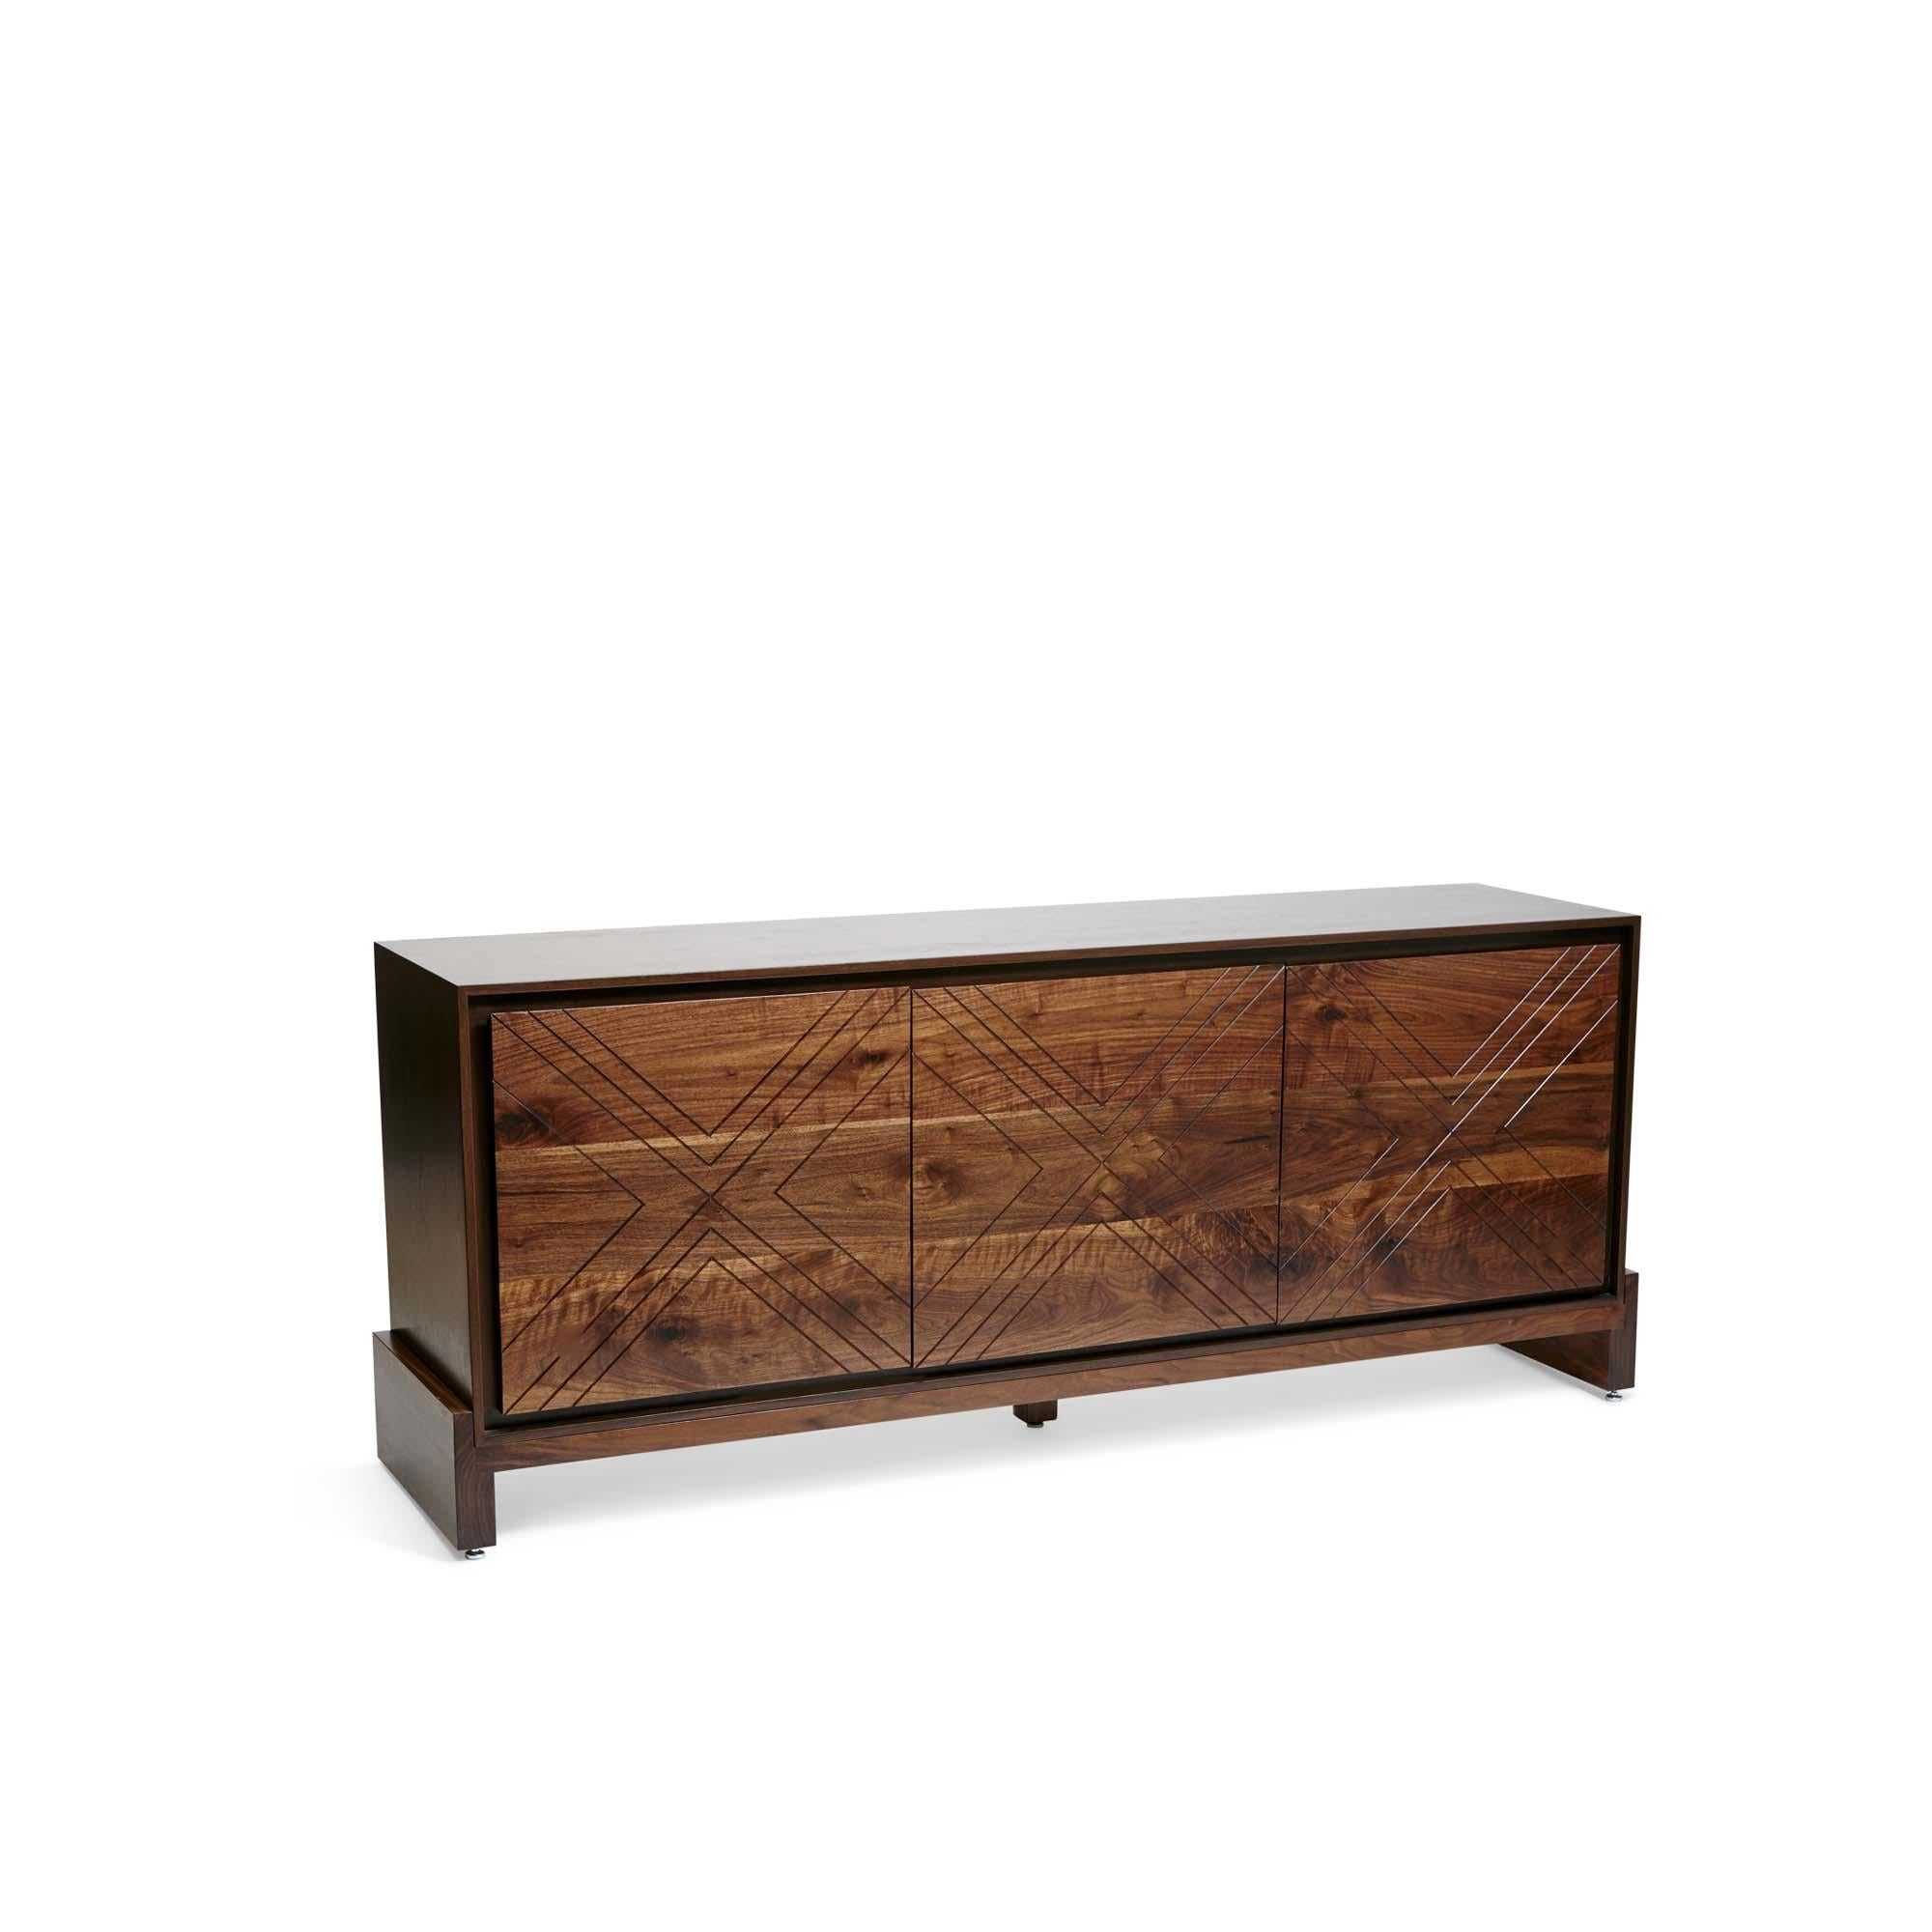 The platform cabinet is a three-door cabinet with a solid American walnut or white oak front and base, with scribed doors. Shown here in Natural Walnut.

The Lawson-Fenning Collection is designed and handmade in Los Angeles, California. Reach out